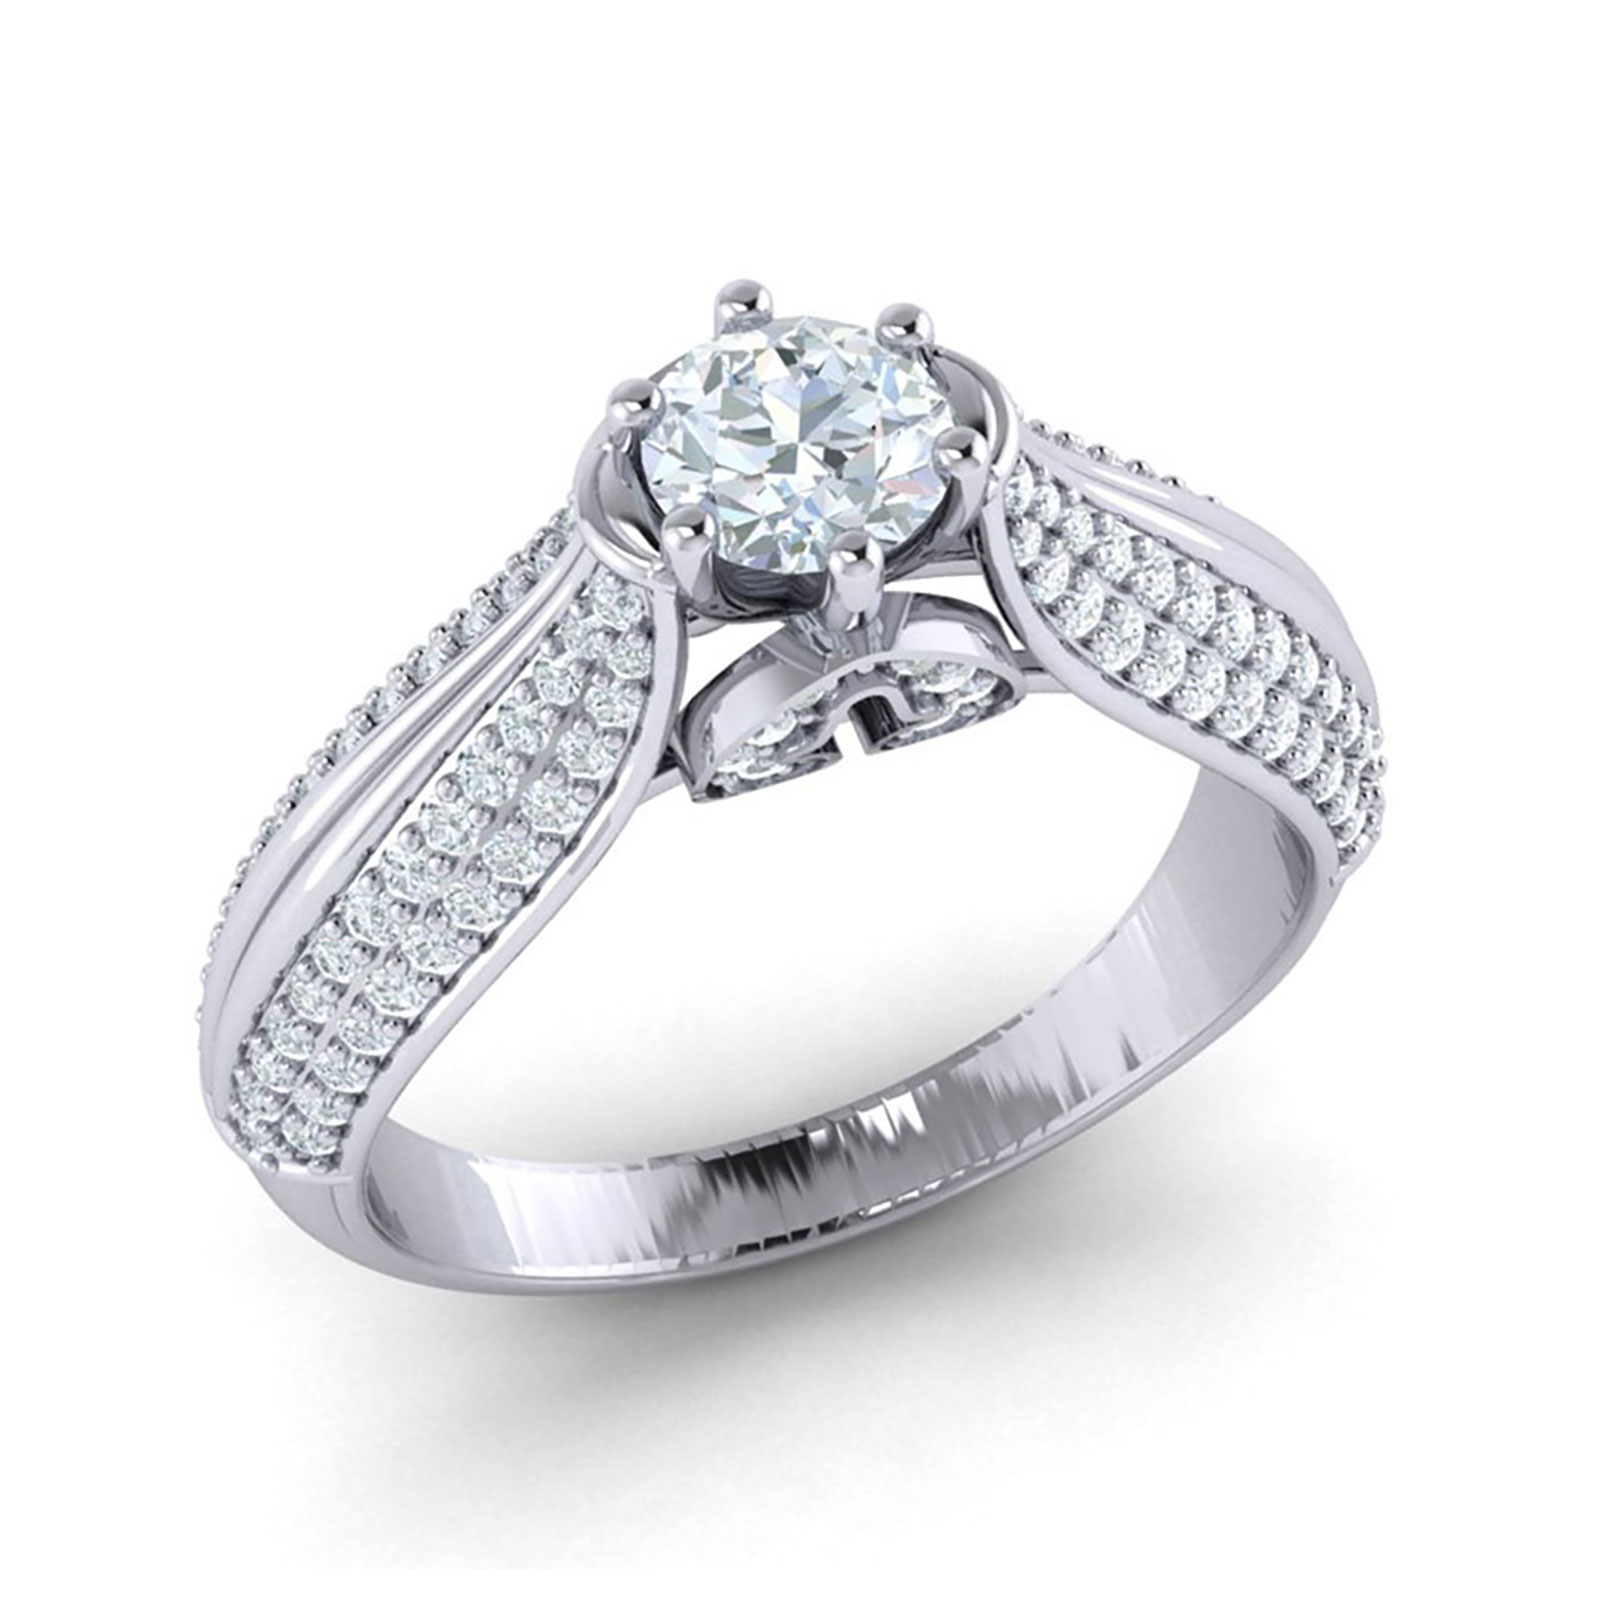 Jewel We Sell 2carat Round Cut Diamond Women's Solitaire Bridal Engagement Ring Anniversary Band 18K White Gold H SI2